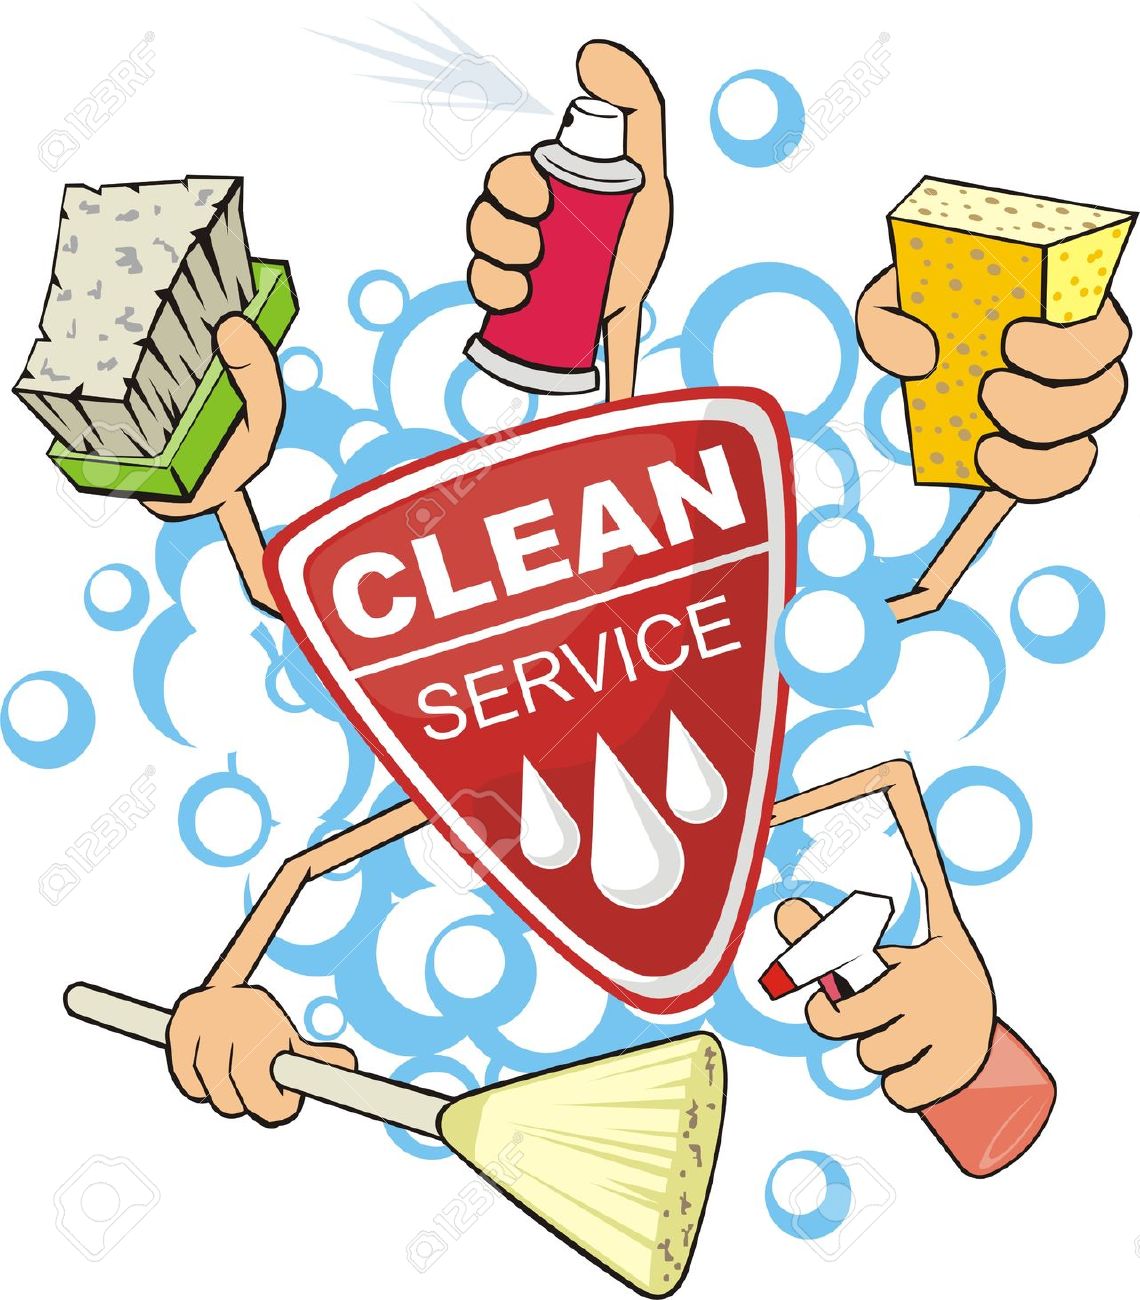 keep clean: sign of the . - Cleaning Clipart